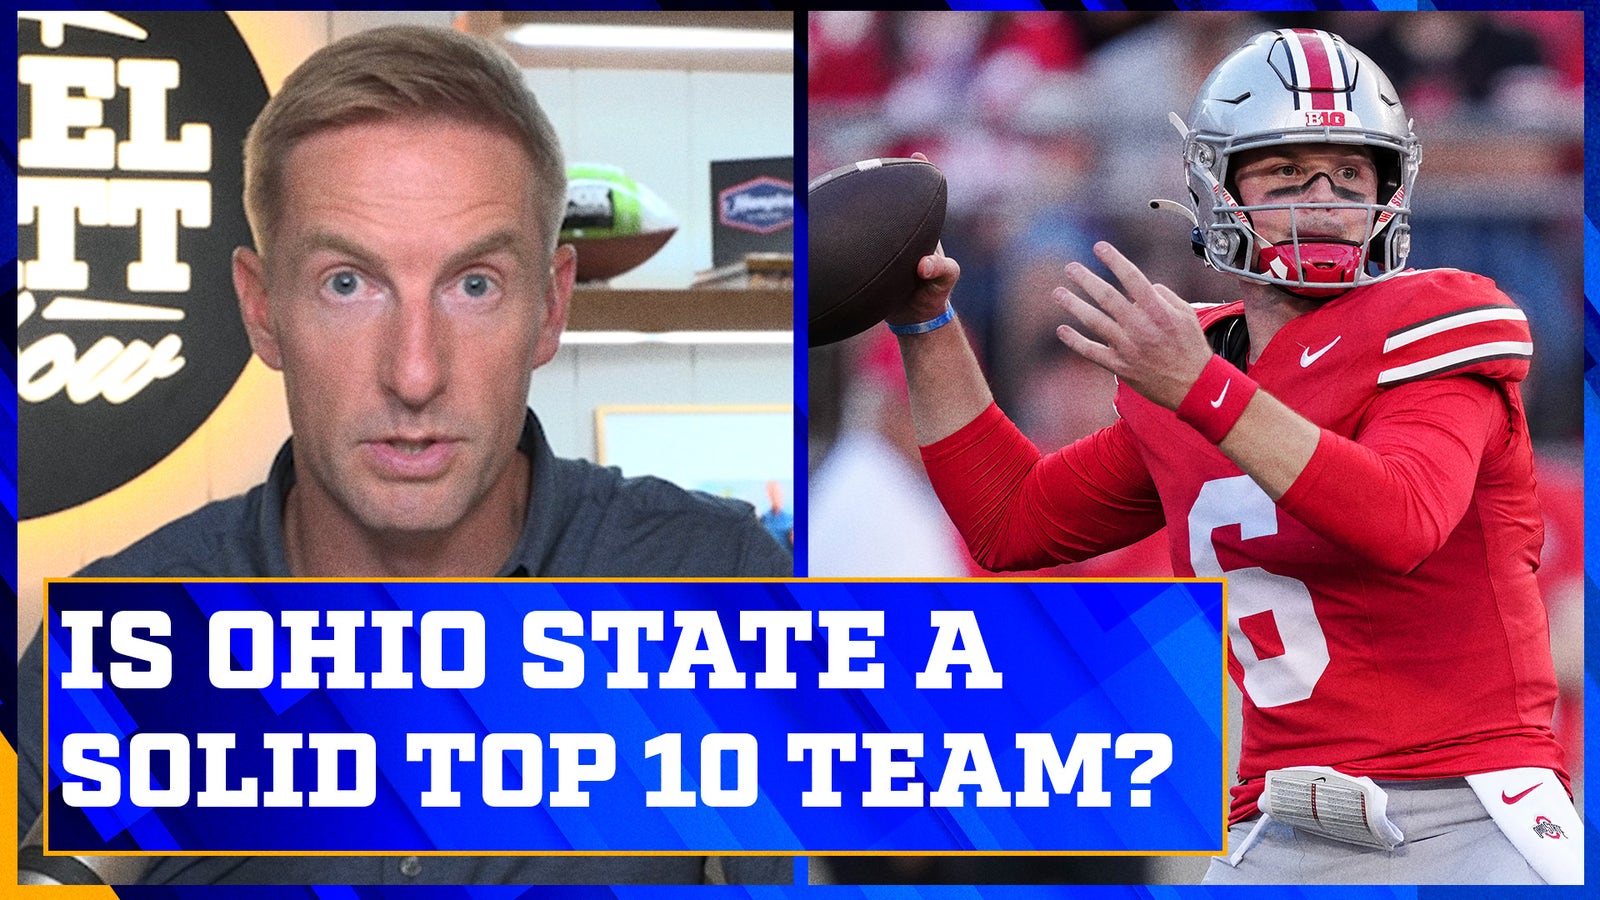 Has Ohio State solidified themselves as a top 10 team?